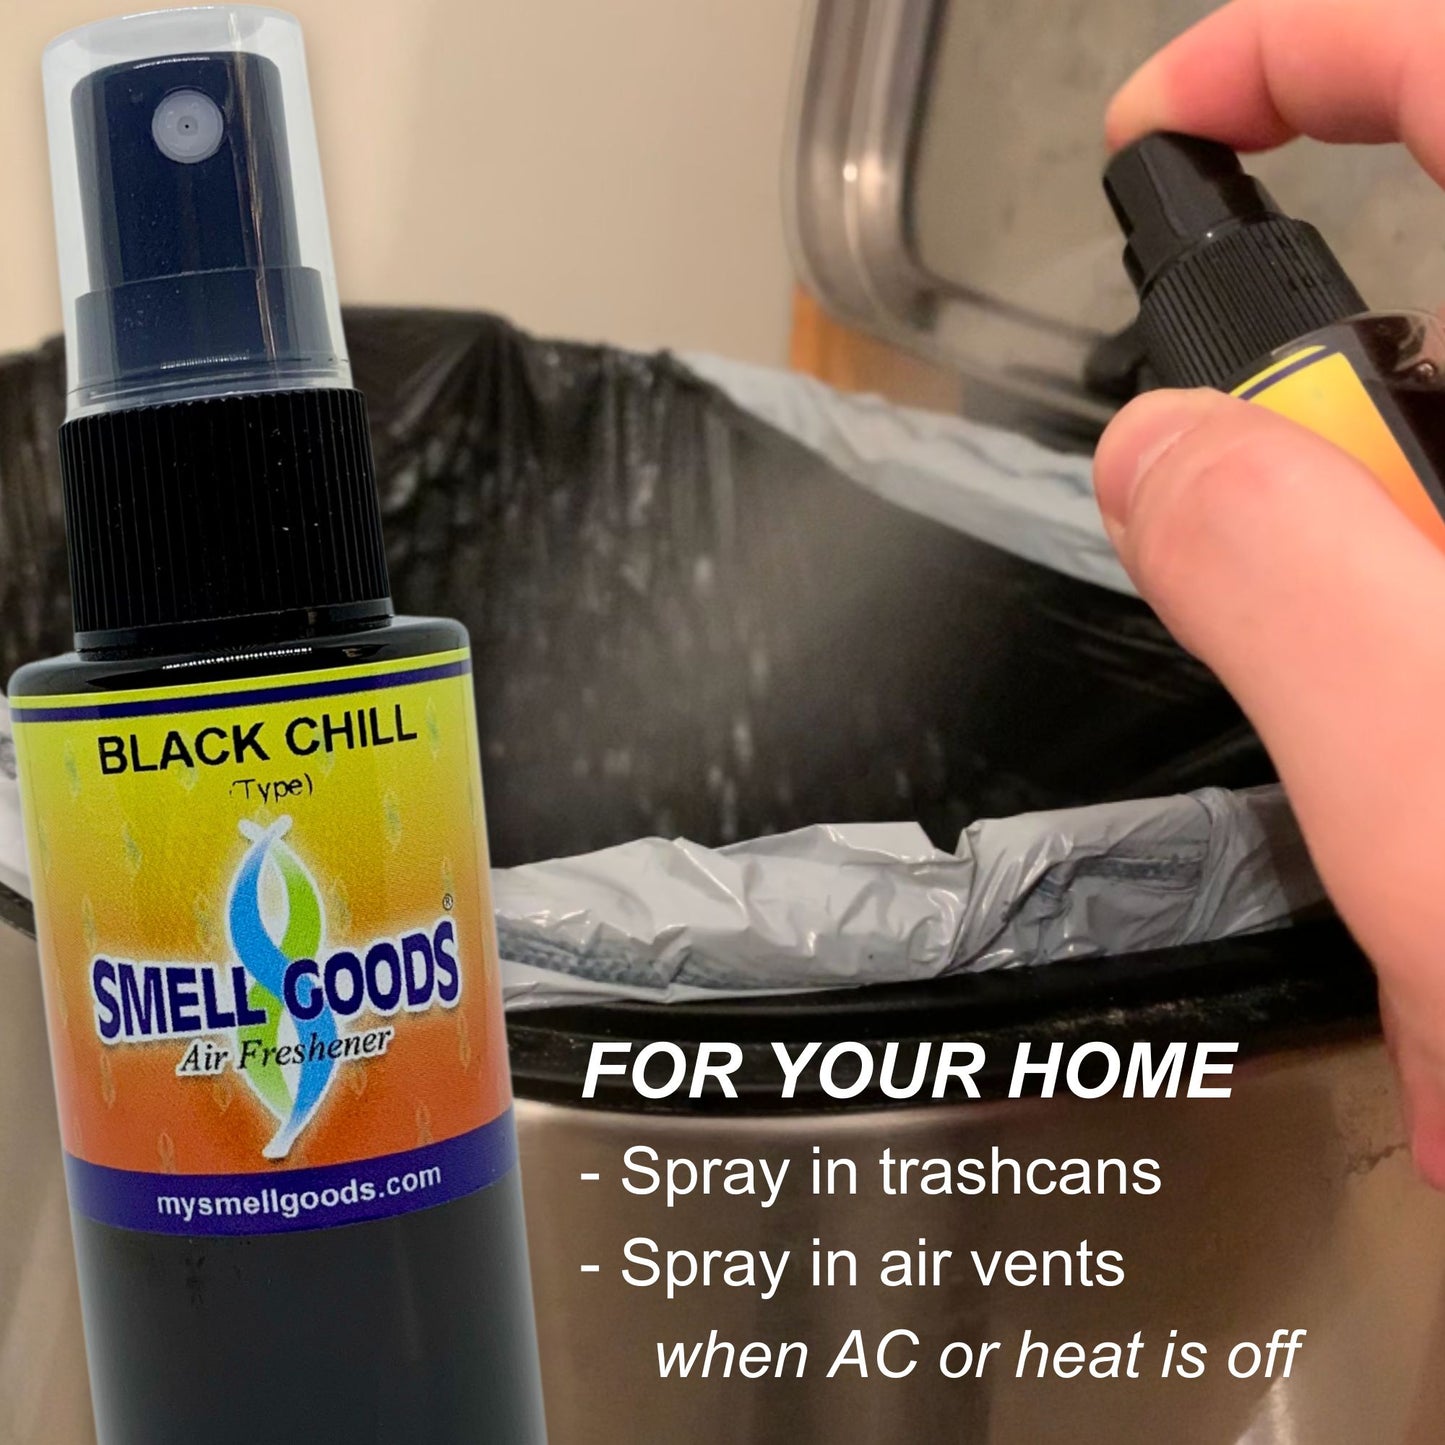 Black Chill (Type) Air Freshener by Smell Goods can be used in your home.